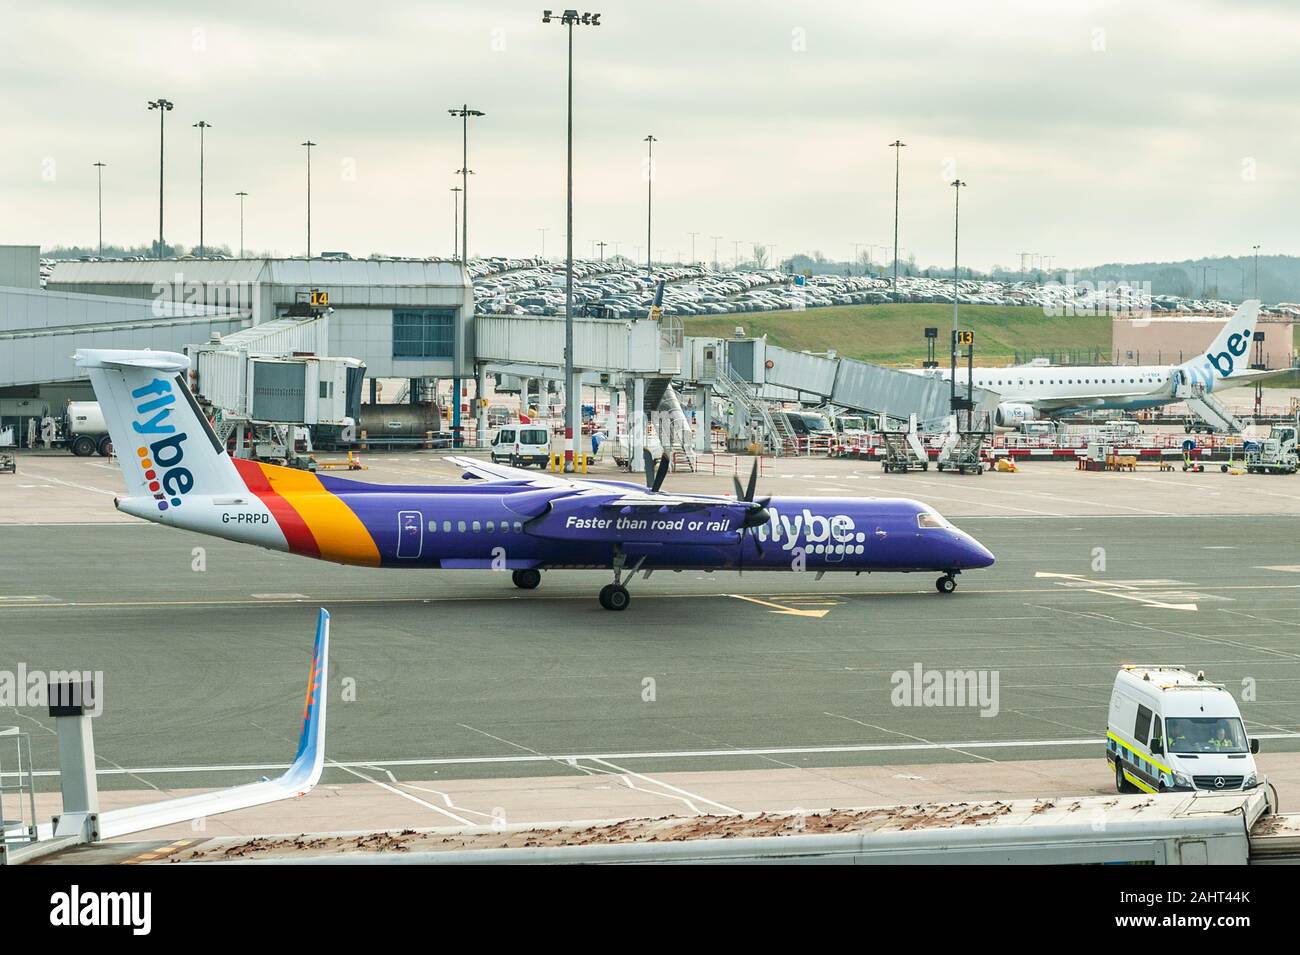 Flybe De Havilland Canada Dash 8-400 Aircraft taxis at Birmingham Airport, West Midlands, UK. Stock Photo